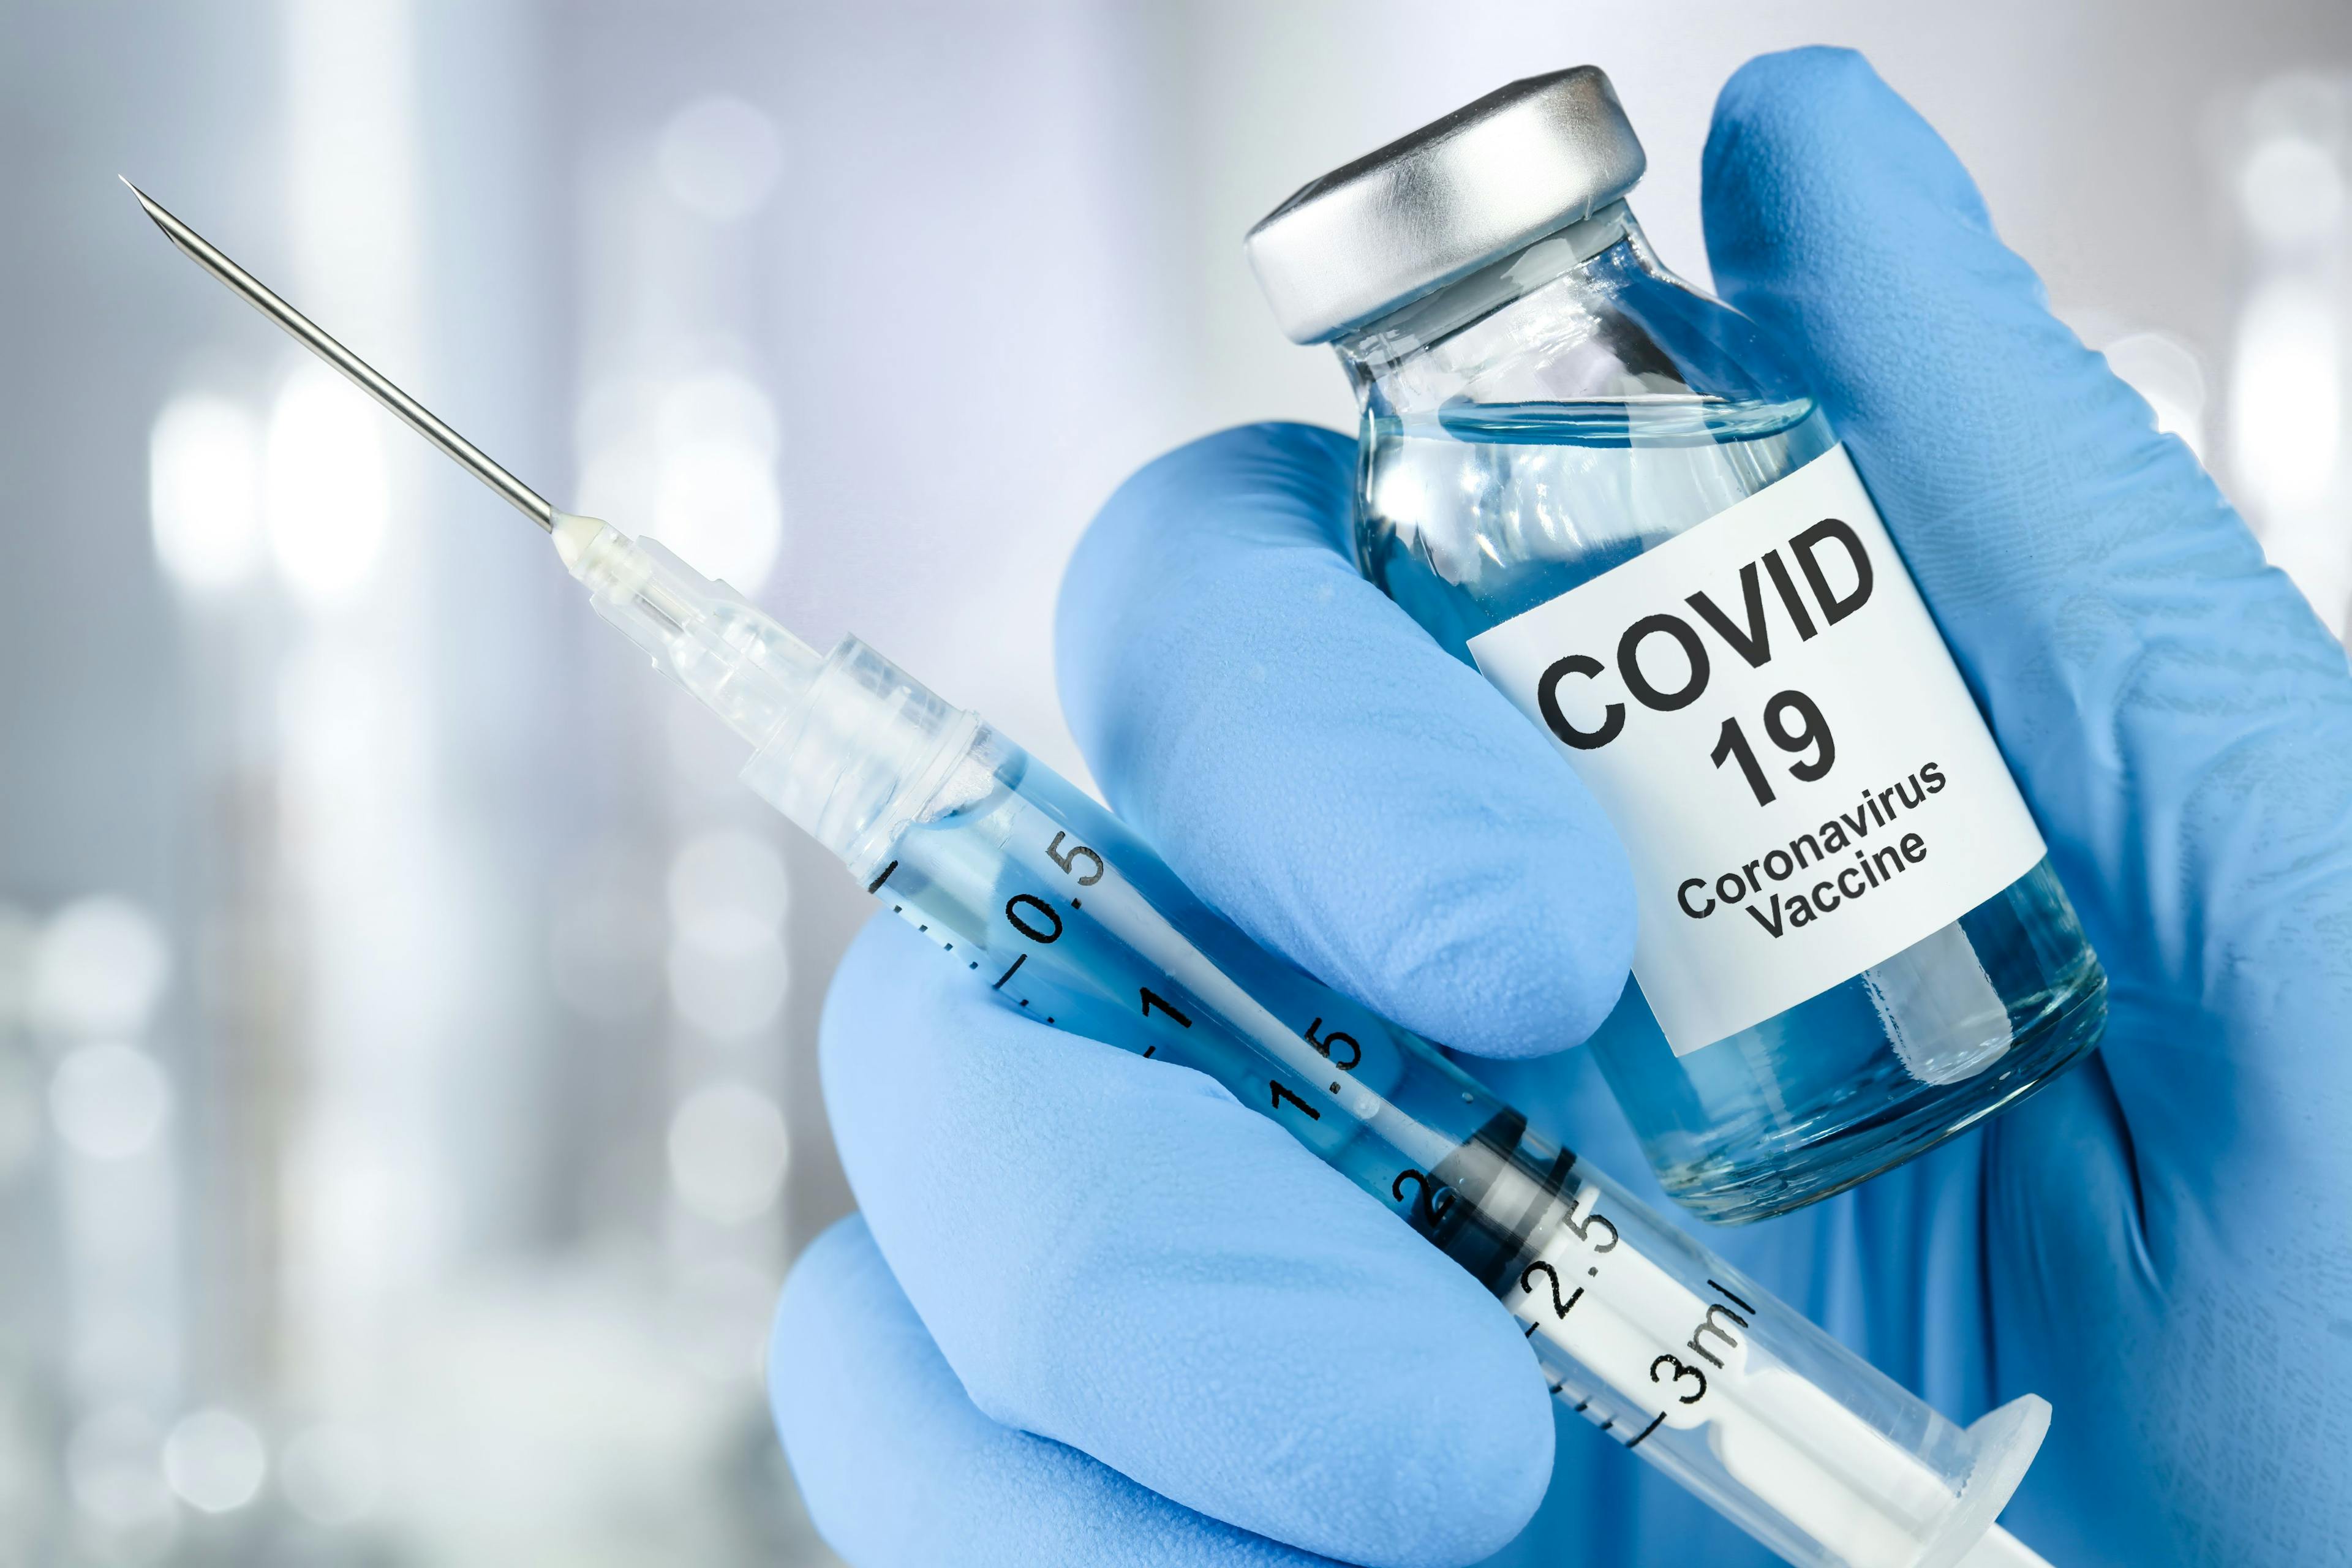 HIV Patients Should Have No Fear of COVID-19 Vaccinations